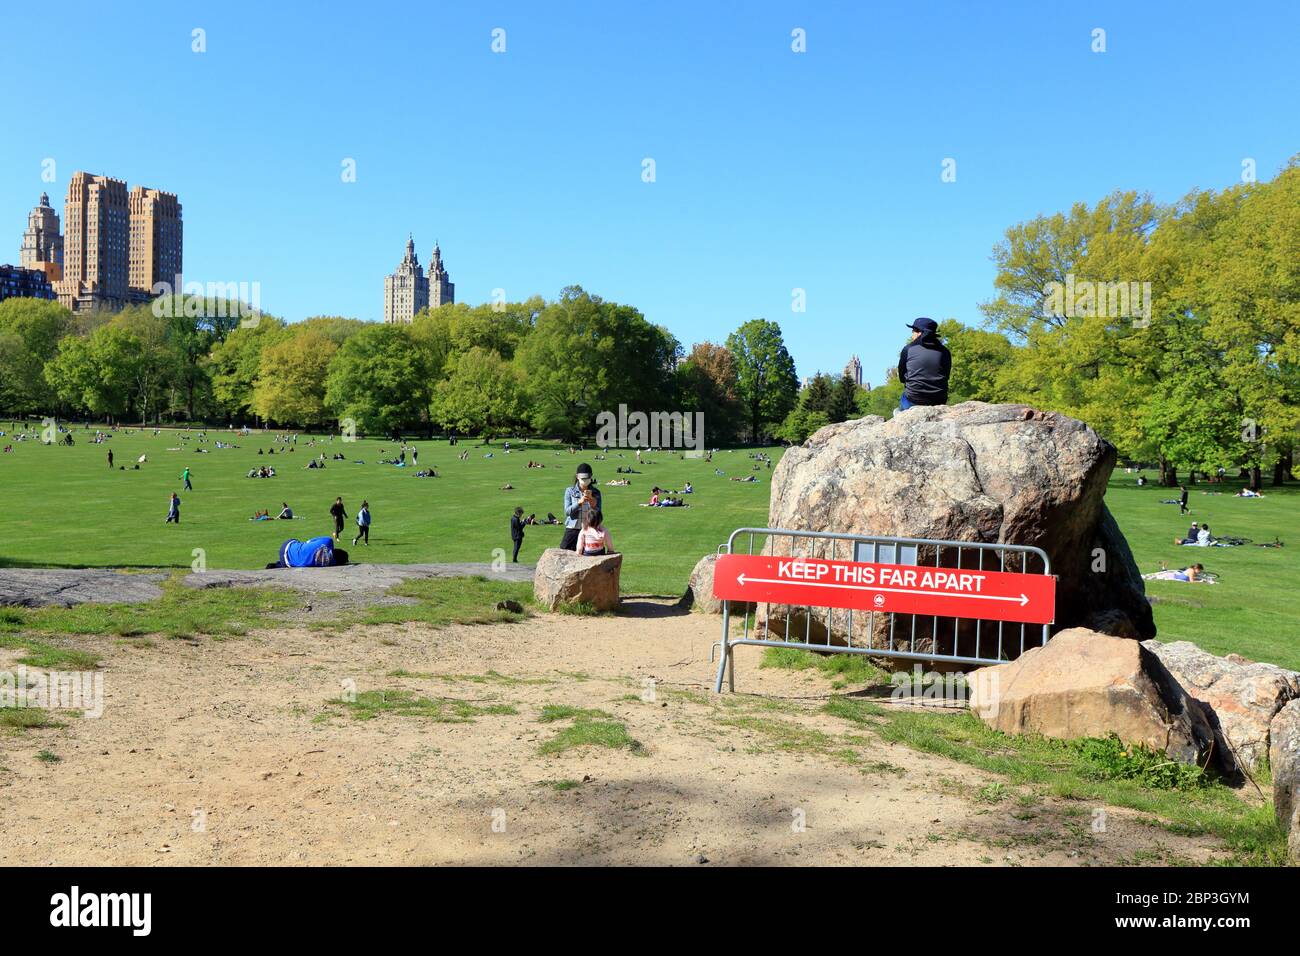 People social distancing in New York Central Park Sheep Meadow with a NYC Parks department six foot social distancing sign in the foreground. Stock Photo